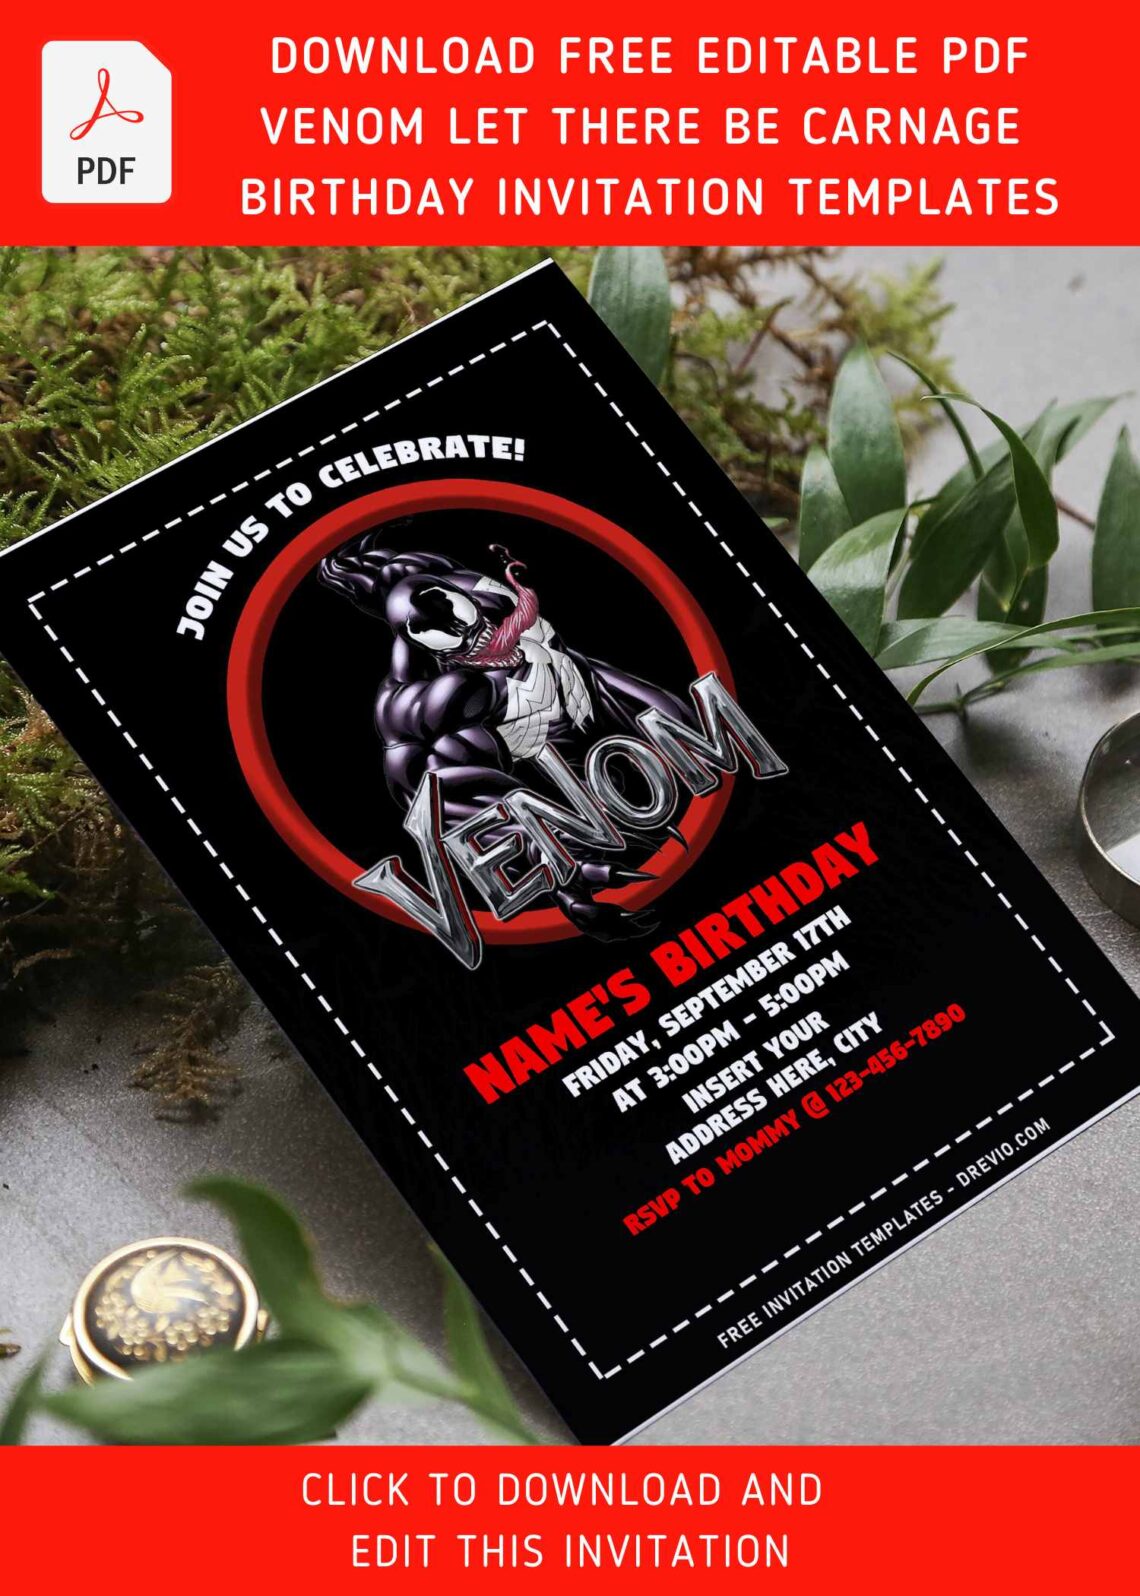 (Free Editable PDF) Venom Let There Be Carnage Birthday Invitation Templates with dash lines border